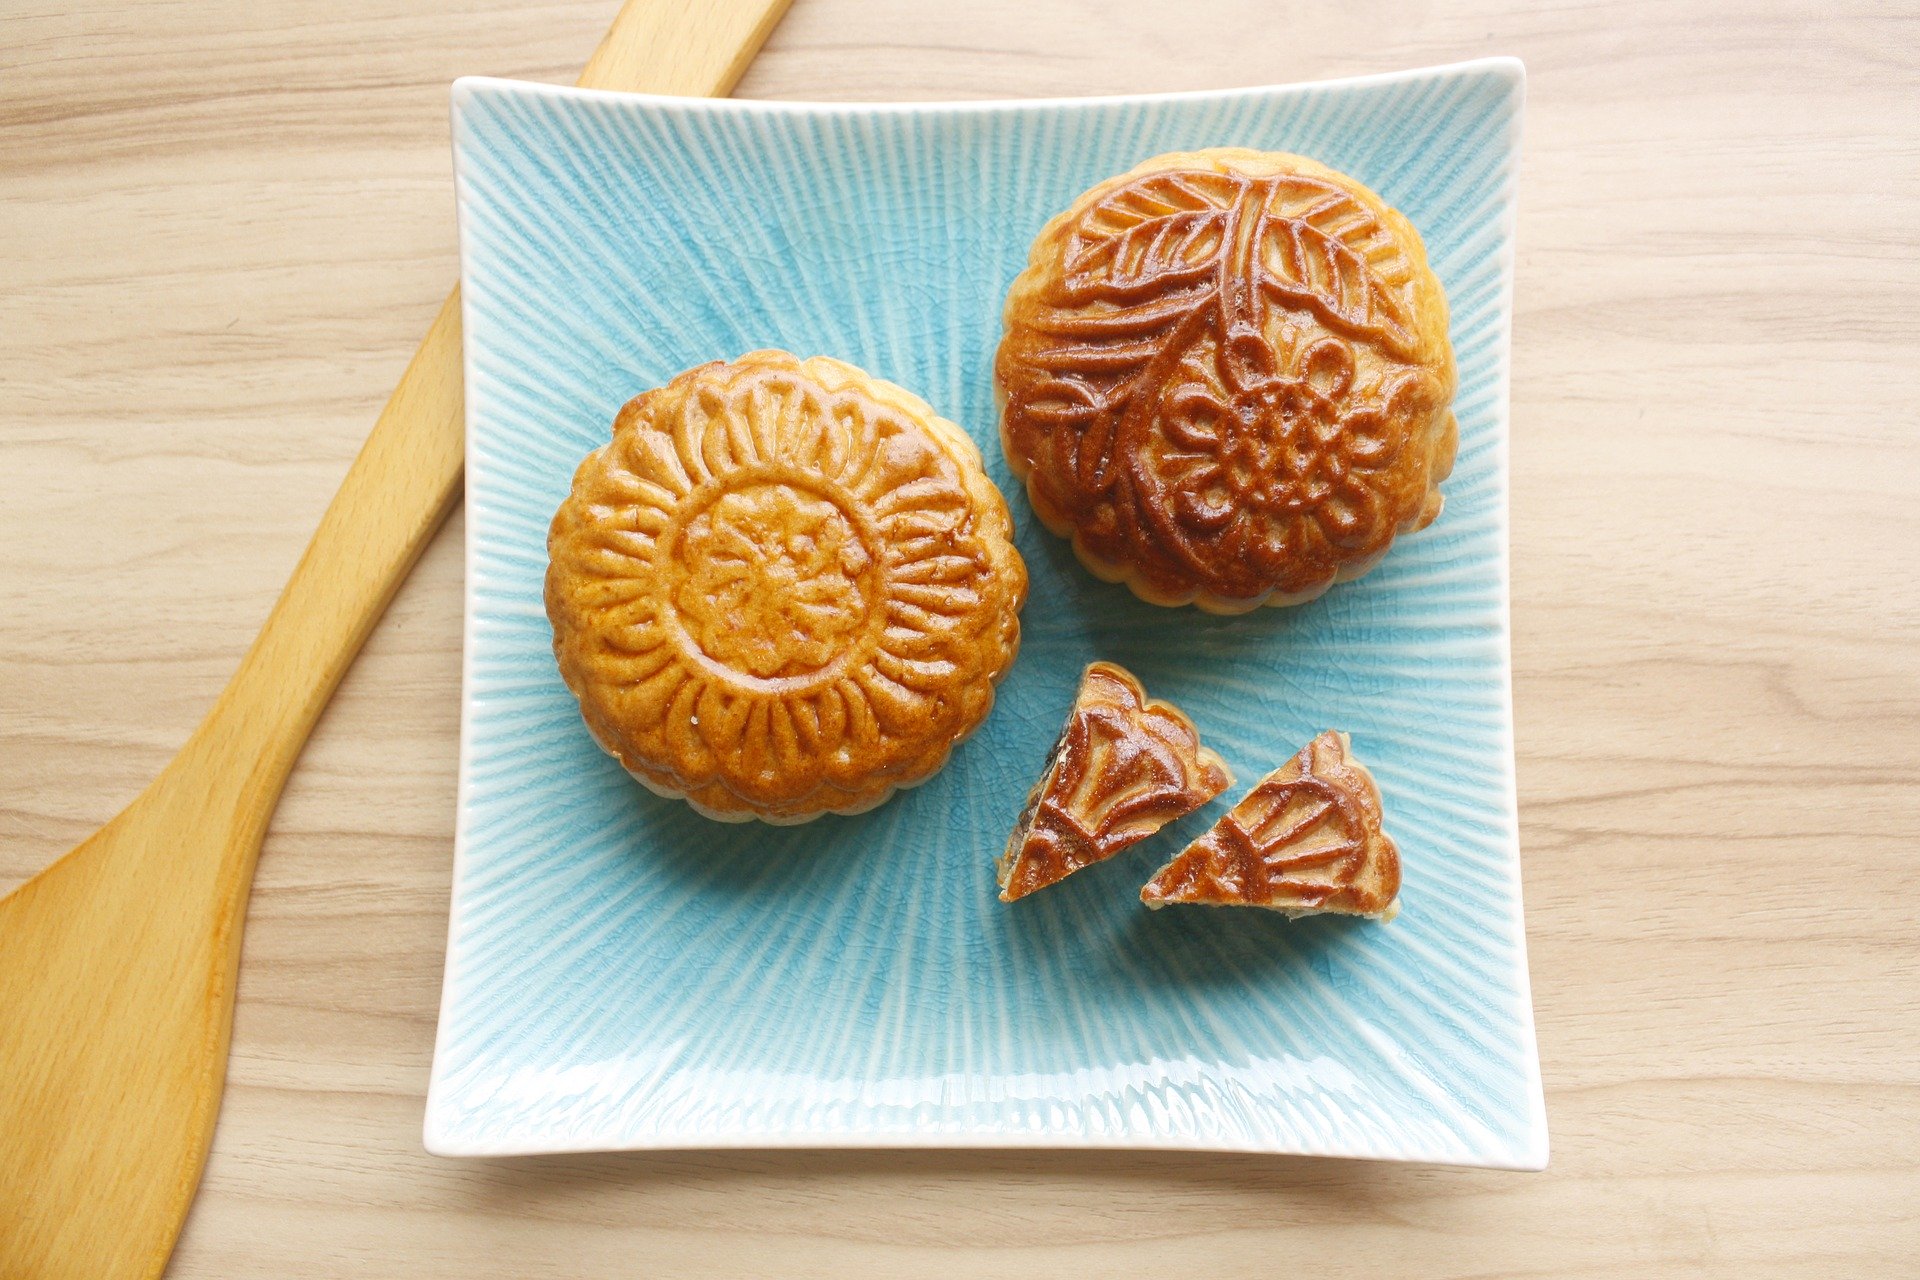 How Did Moon Cakes Become Financial Products?